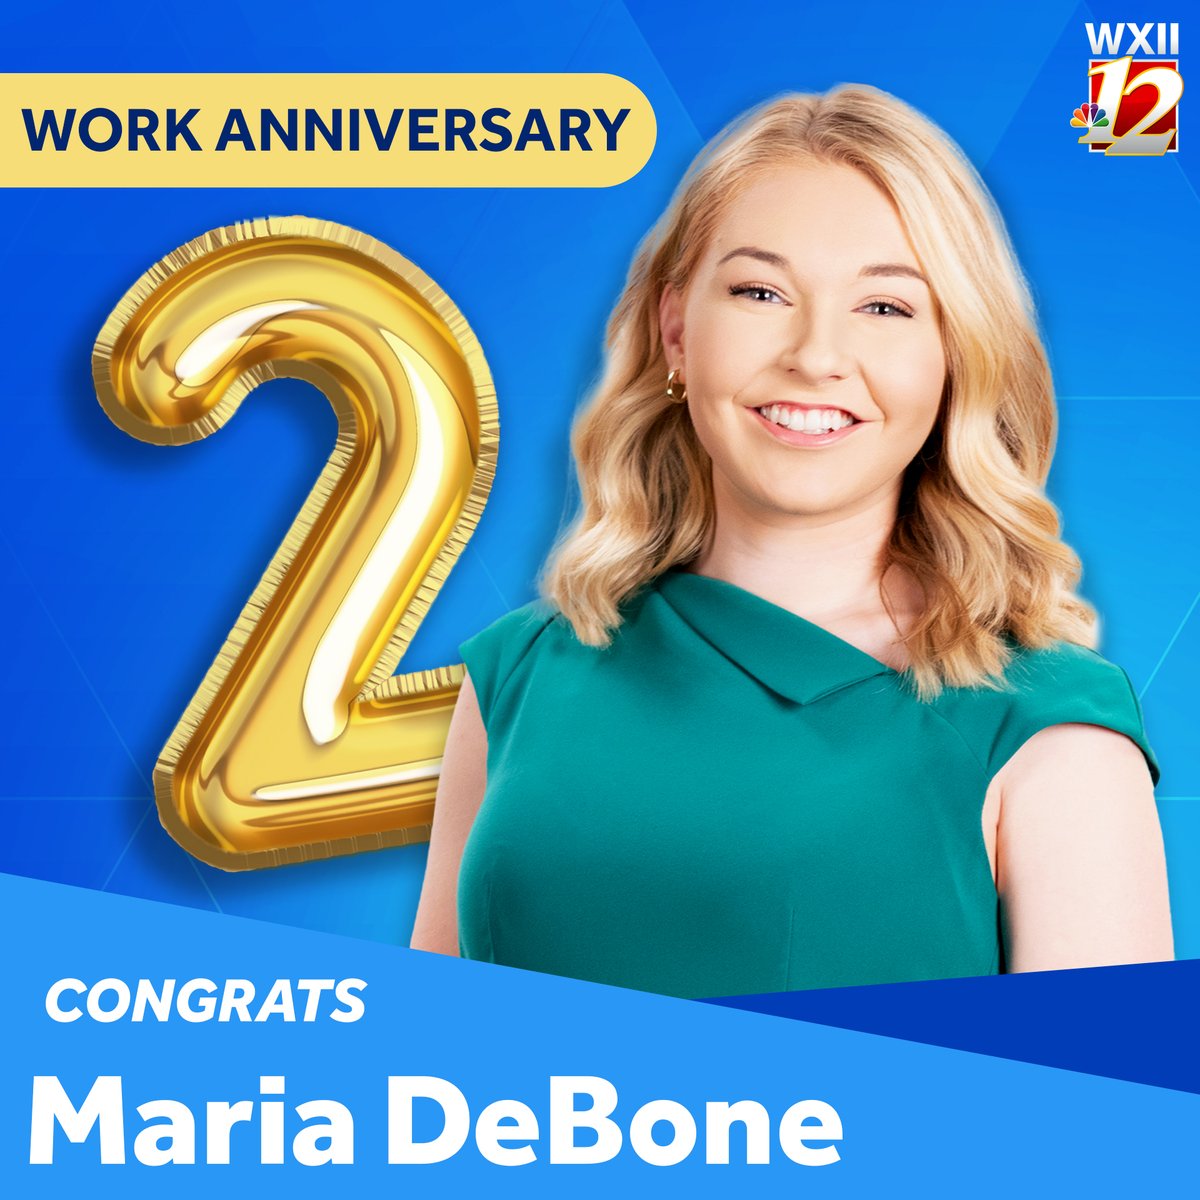 It's been 🥈 amazing years with @WXIIMaria! 👏👏
Congratulate Maria in the comments! 📢
#anniversary #workfamily